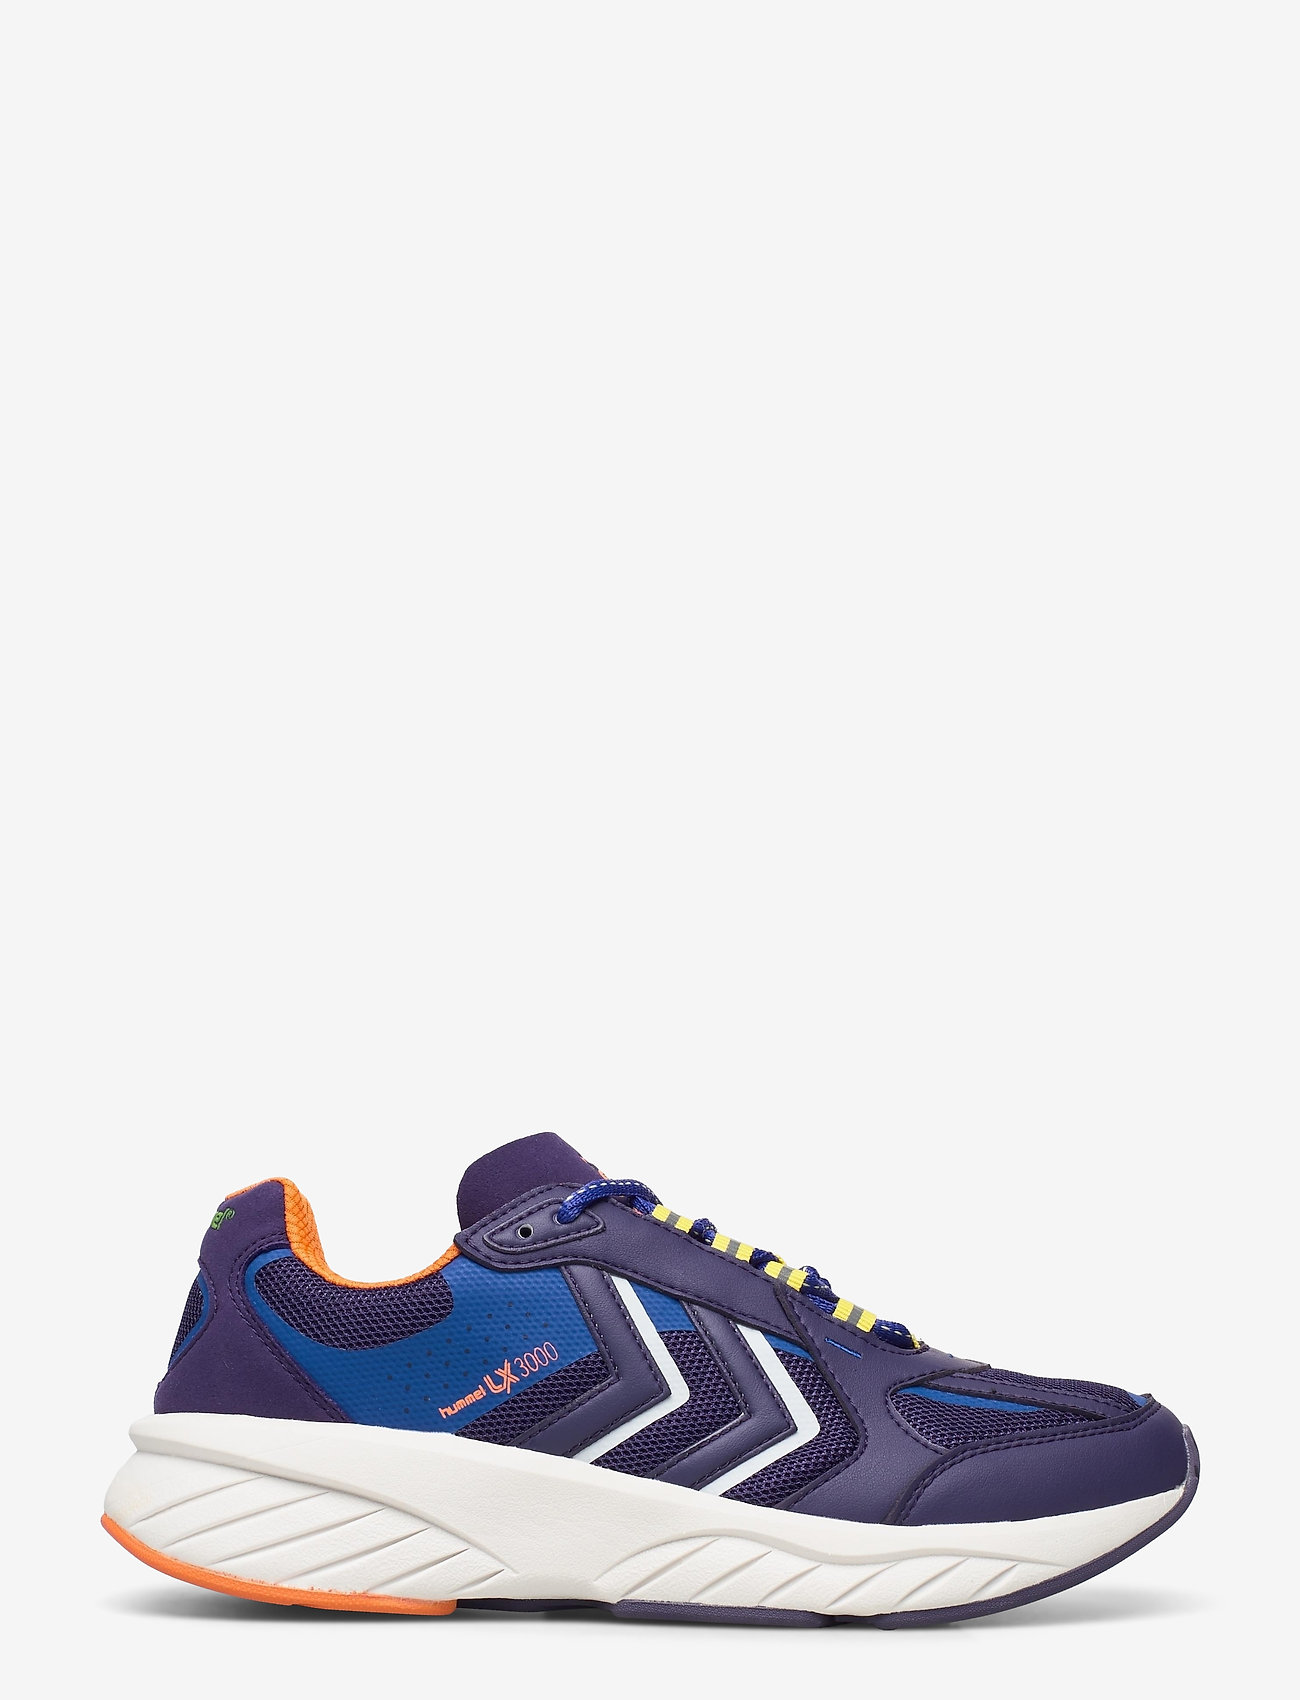 Hummel - REACH LX 3000 - lave sneakers - navy - 1